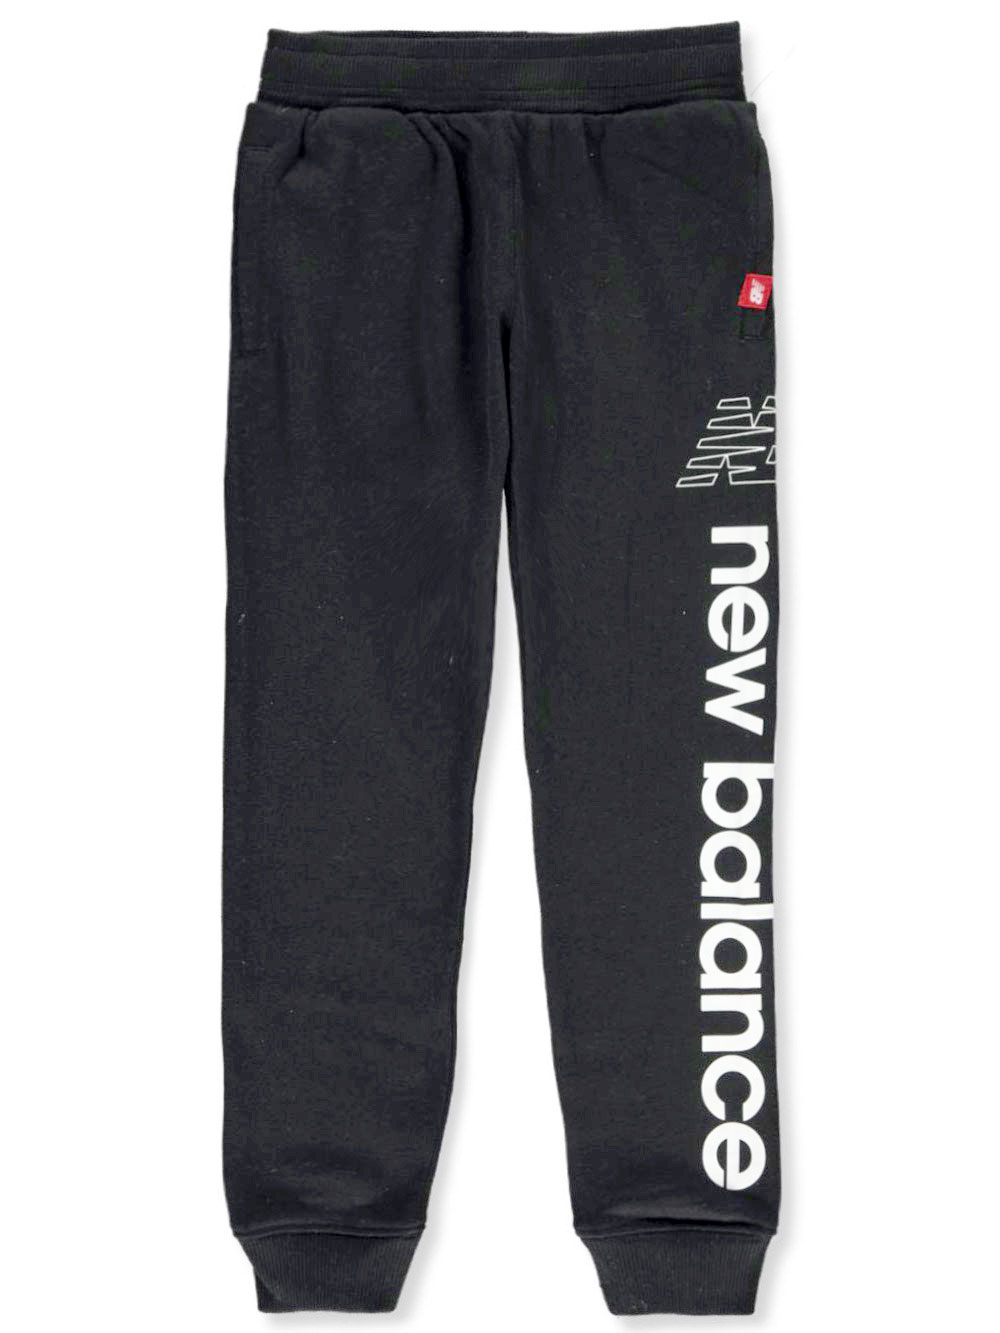 Boys Blue and Gray Sweatpants